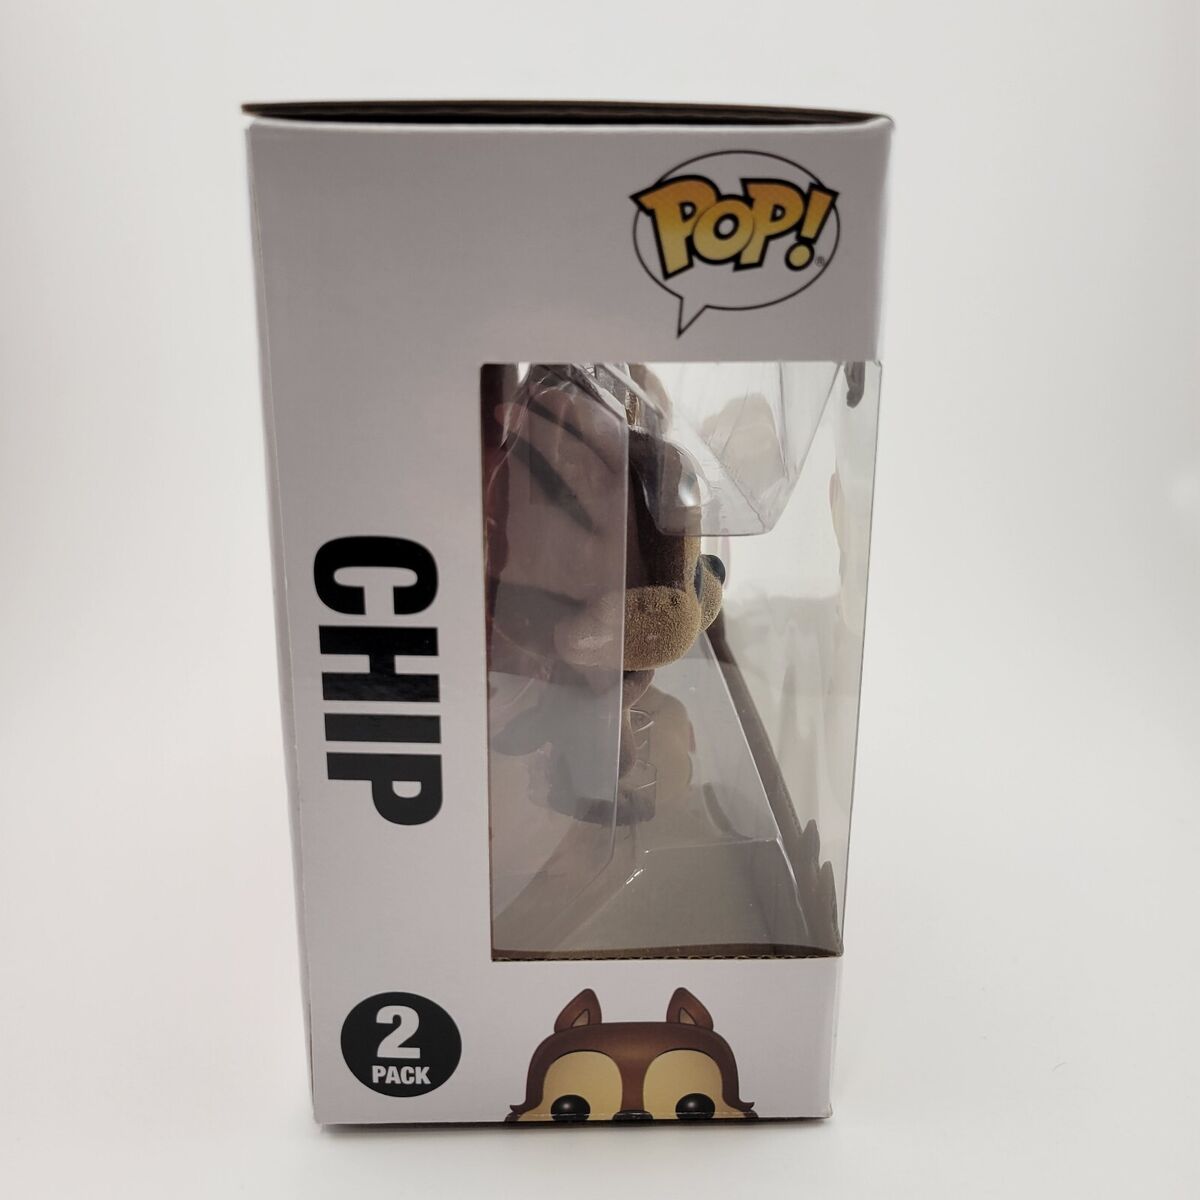 Funko POP Disney: Chip and Dale Flocked Vinyl Figures 2 Pack SDCC 2017  Exclusive